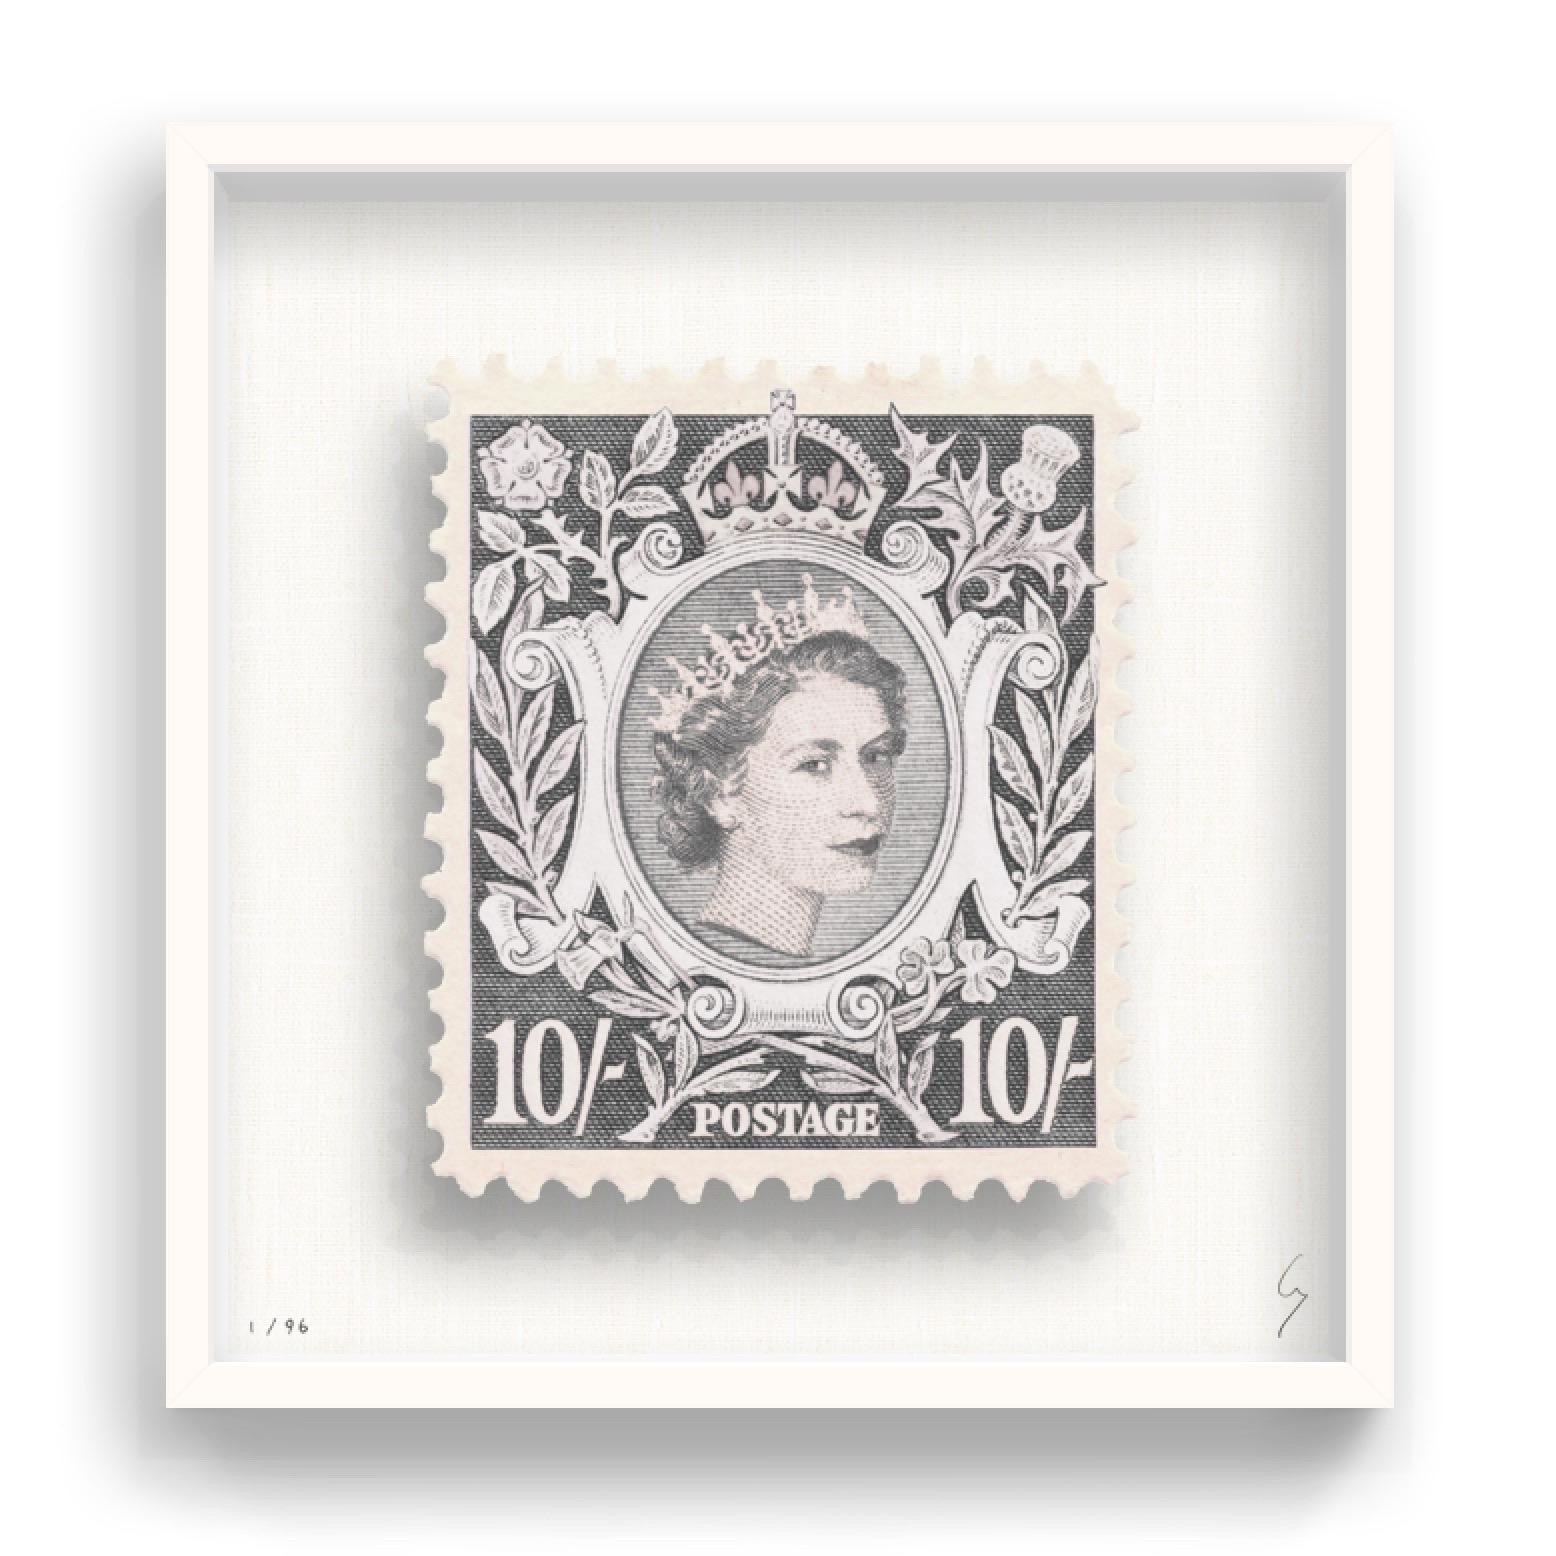 Guy Gee, Queen B&W (medium)

Hand-engraved print on 350gsm on G.F Smith card
53 x 56 cm (20 4/5 x 22 2/5)
Frame included 
Edition of 96

Each artwork by Guy had been digitally reimagined from an original postage stamp. Cut out and finished by hand,